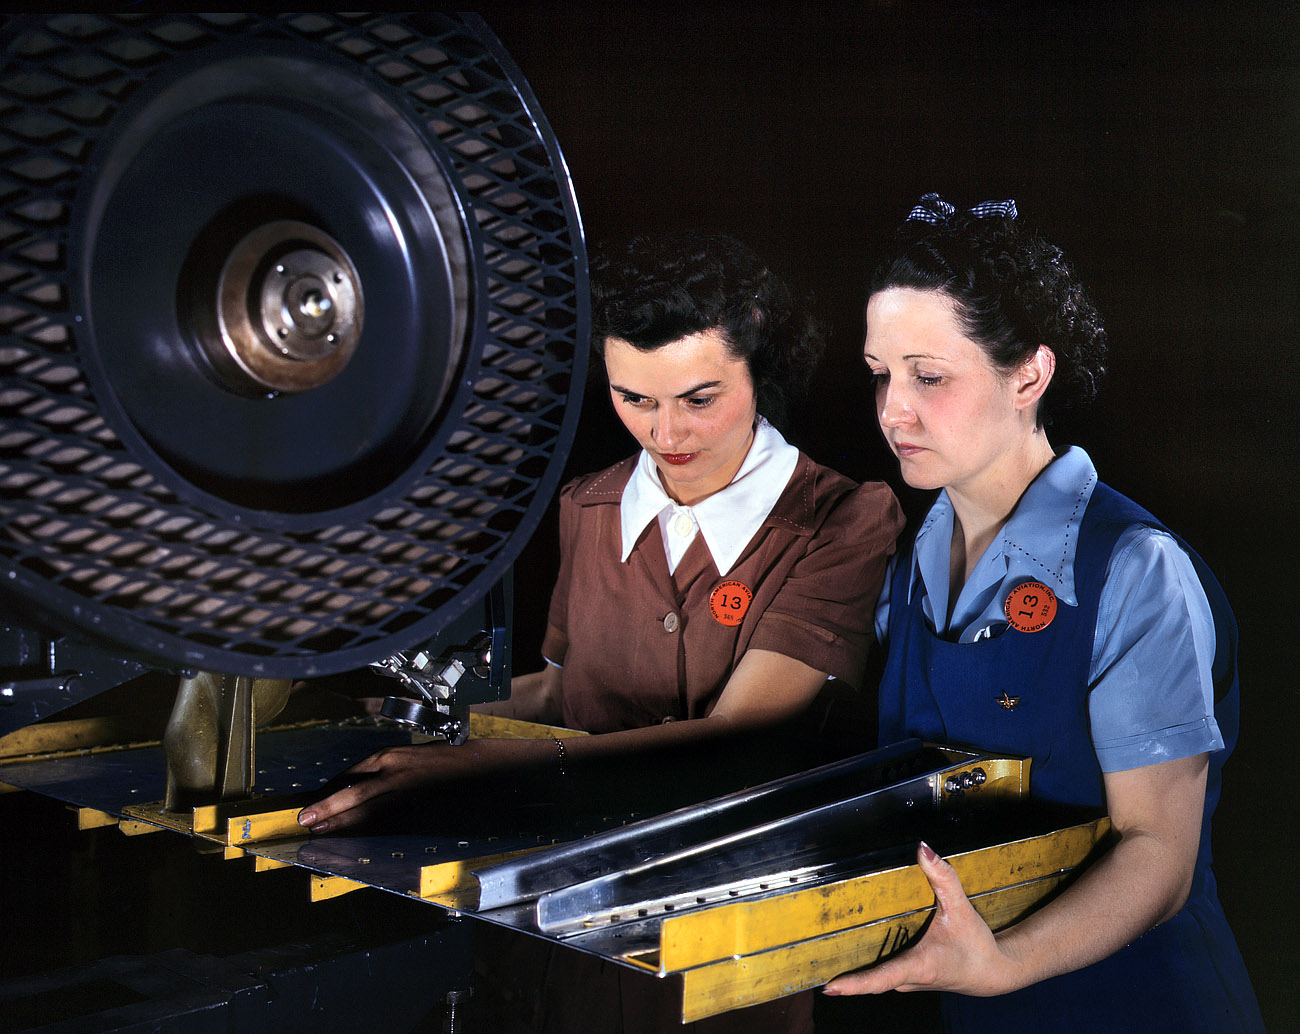 June 1942. Inglewood, California. "Punching rivet holes in a frame member for a B-25 bomber at North American Aviation." View full size. 4x5 Kodachrome transparency by Alfred Palmer for the Office of War Information.